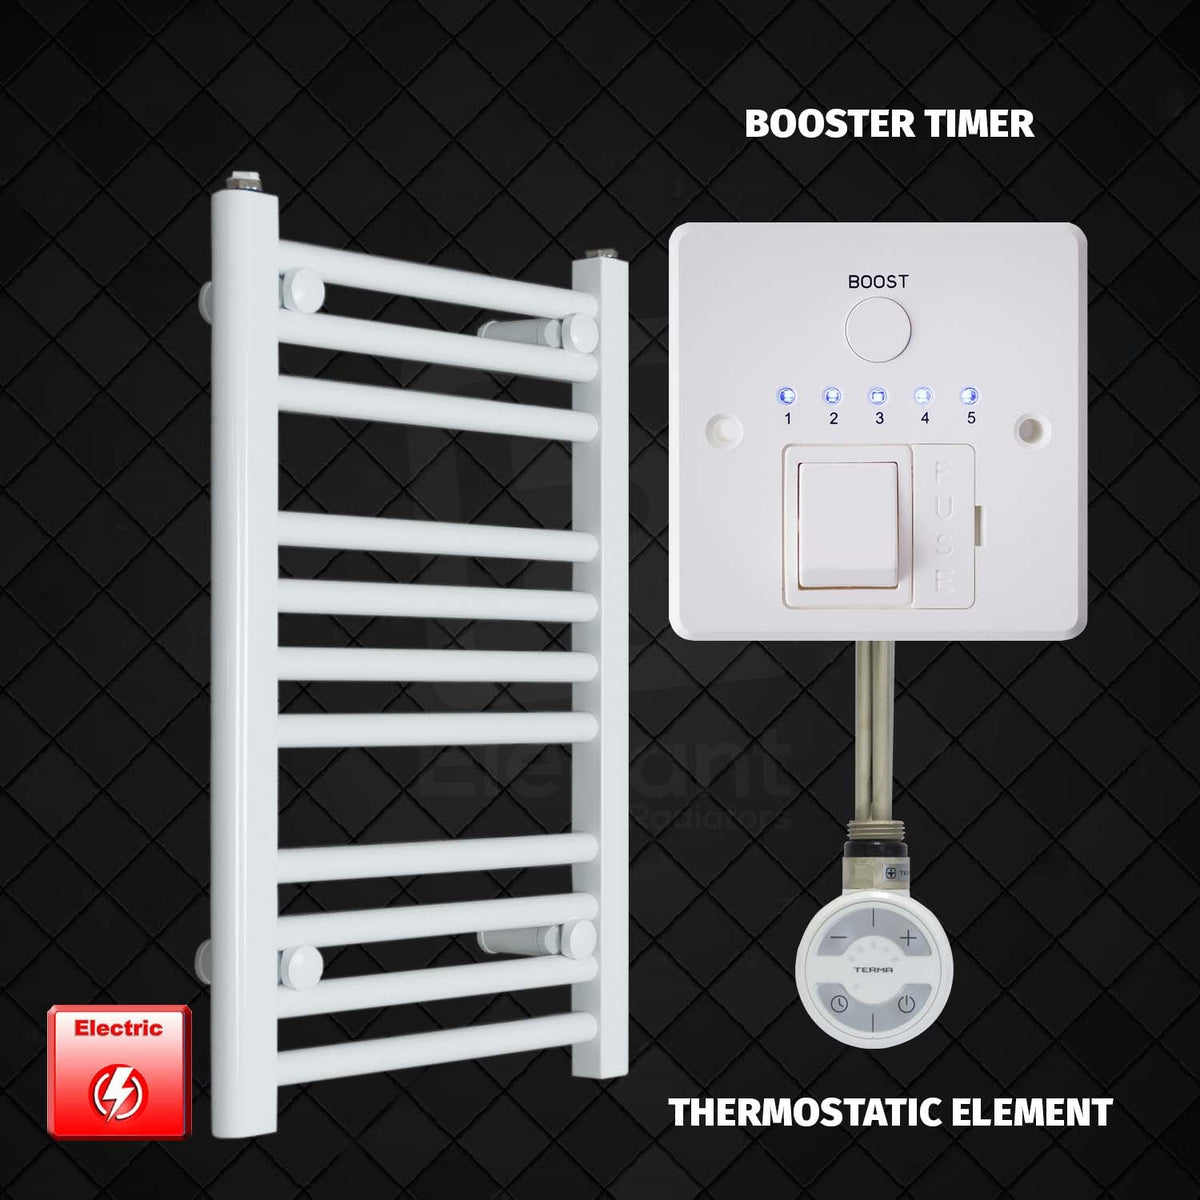 600 mm High 400 mm Wide Pre-Filled Electric Heated Towel Rail Radiator White HTR Thermostatic Element With Booster Timer